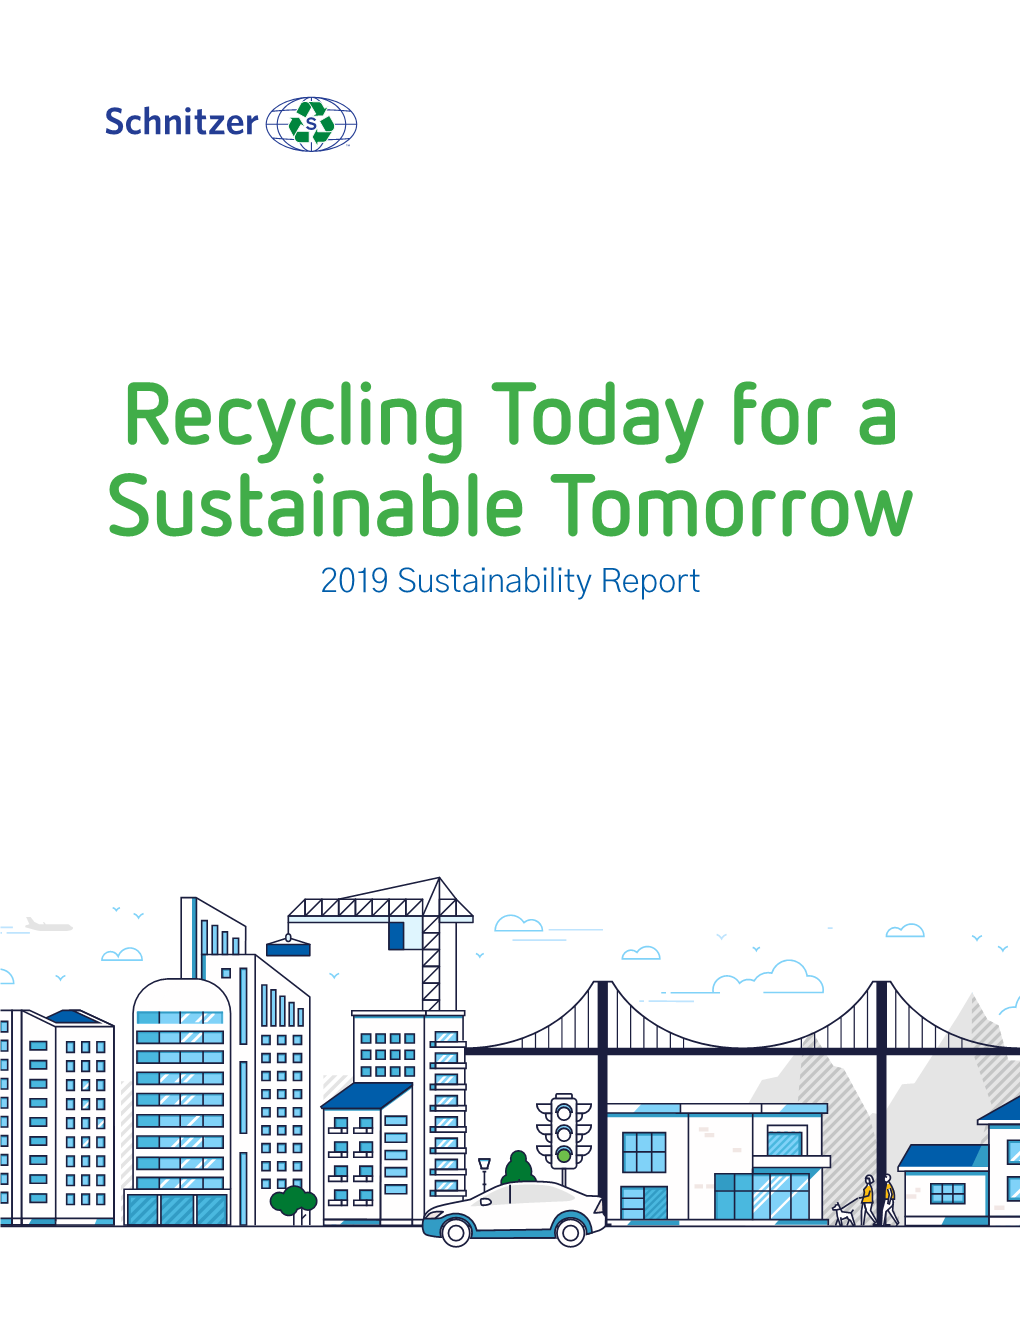 Recycling Today for a Sustainable Tomorrow 2019 Sustainability Report Less Waste